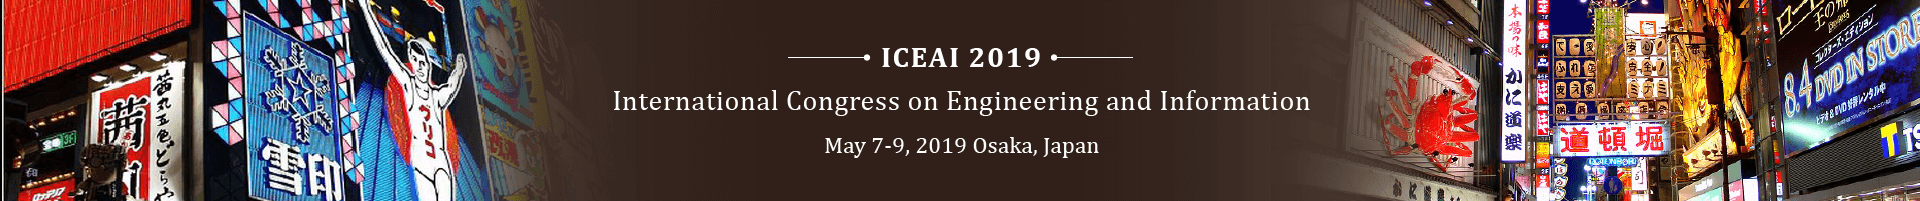 2019 ICEAI The 9th International Congress on Engineering and Information, Osaka, Japan